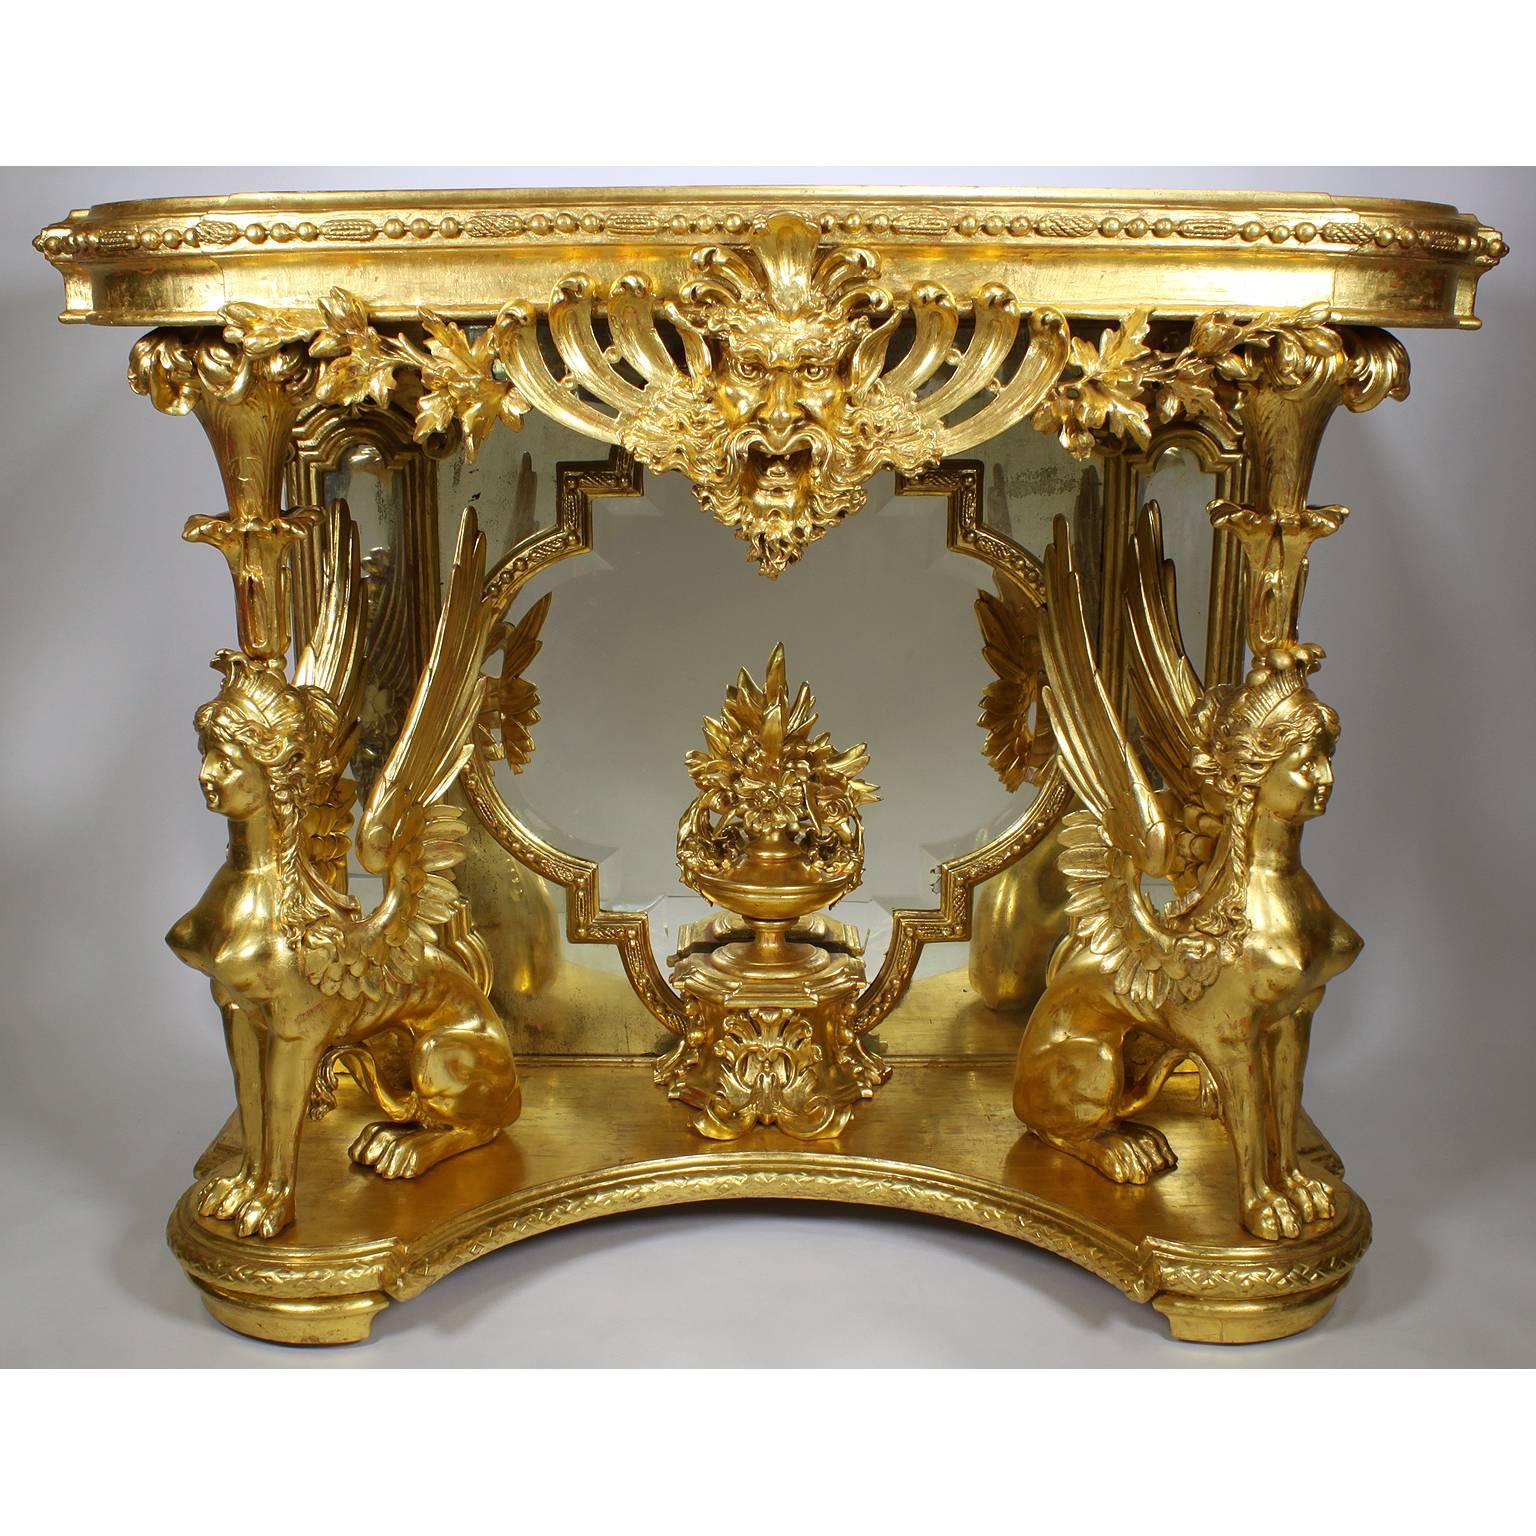 French Empire Revival 19th Century Giltwood Carved Figural Console and Mirror For Sale 2